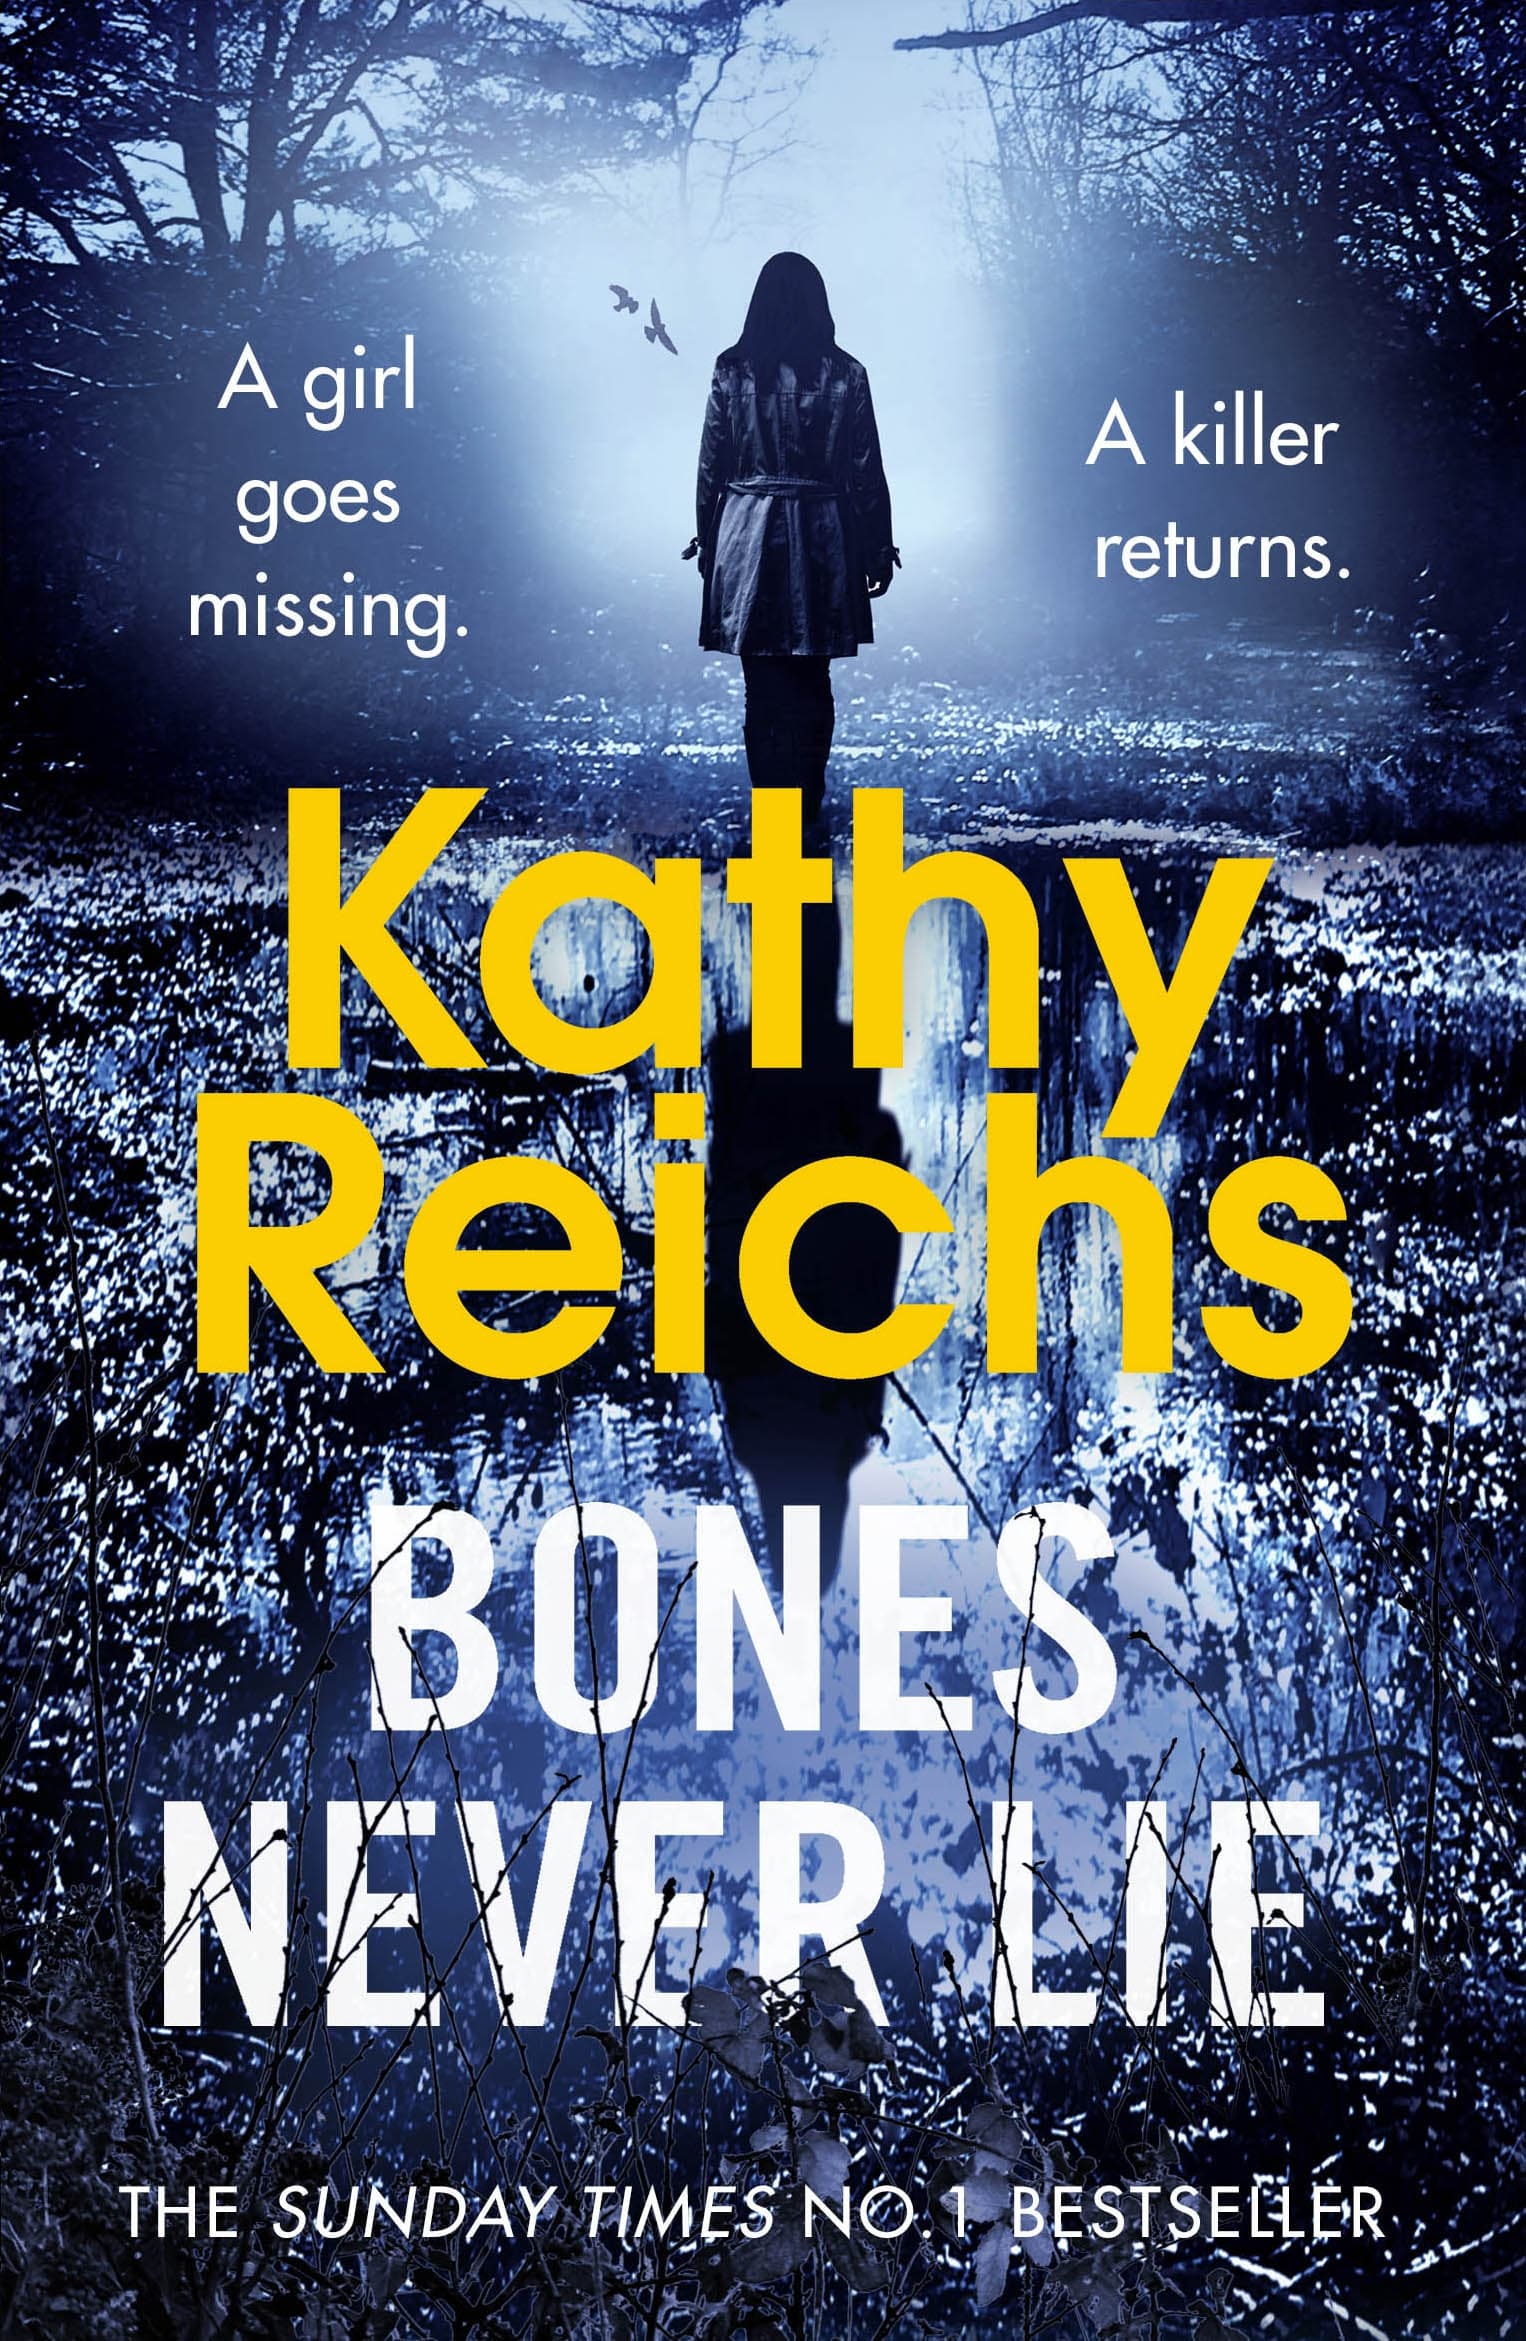 Book cover of Bones Never Lie by Kathy Reichs